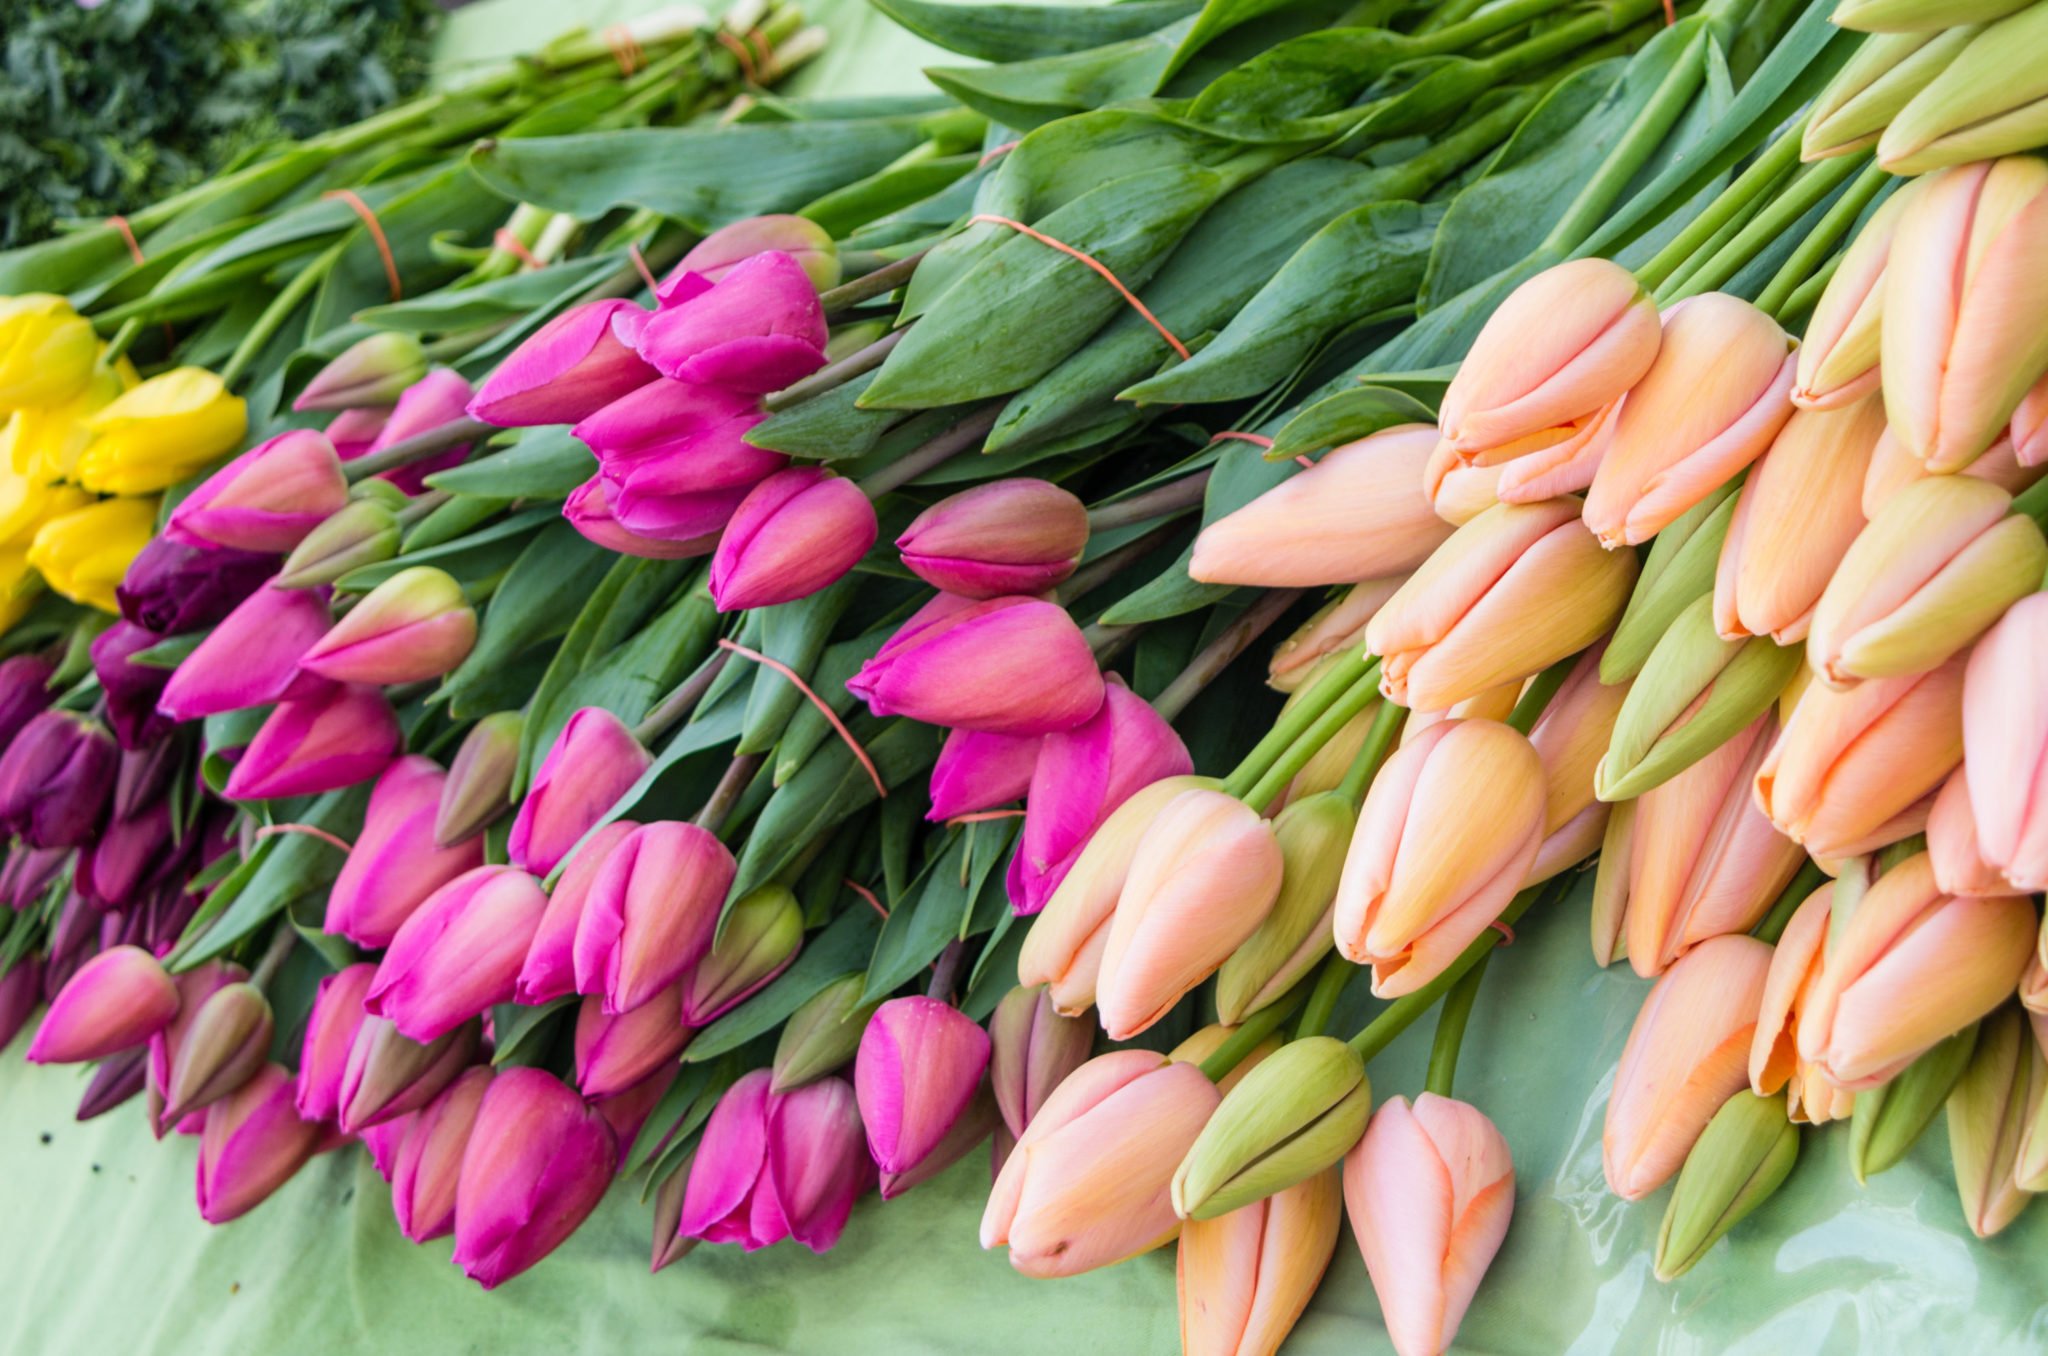 Colorful tulip flowers on display at the farmers market.